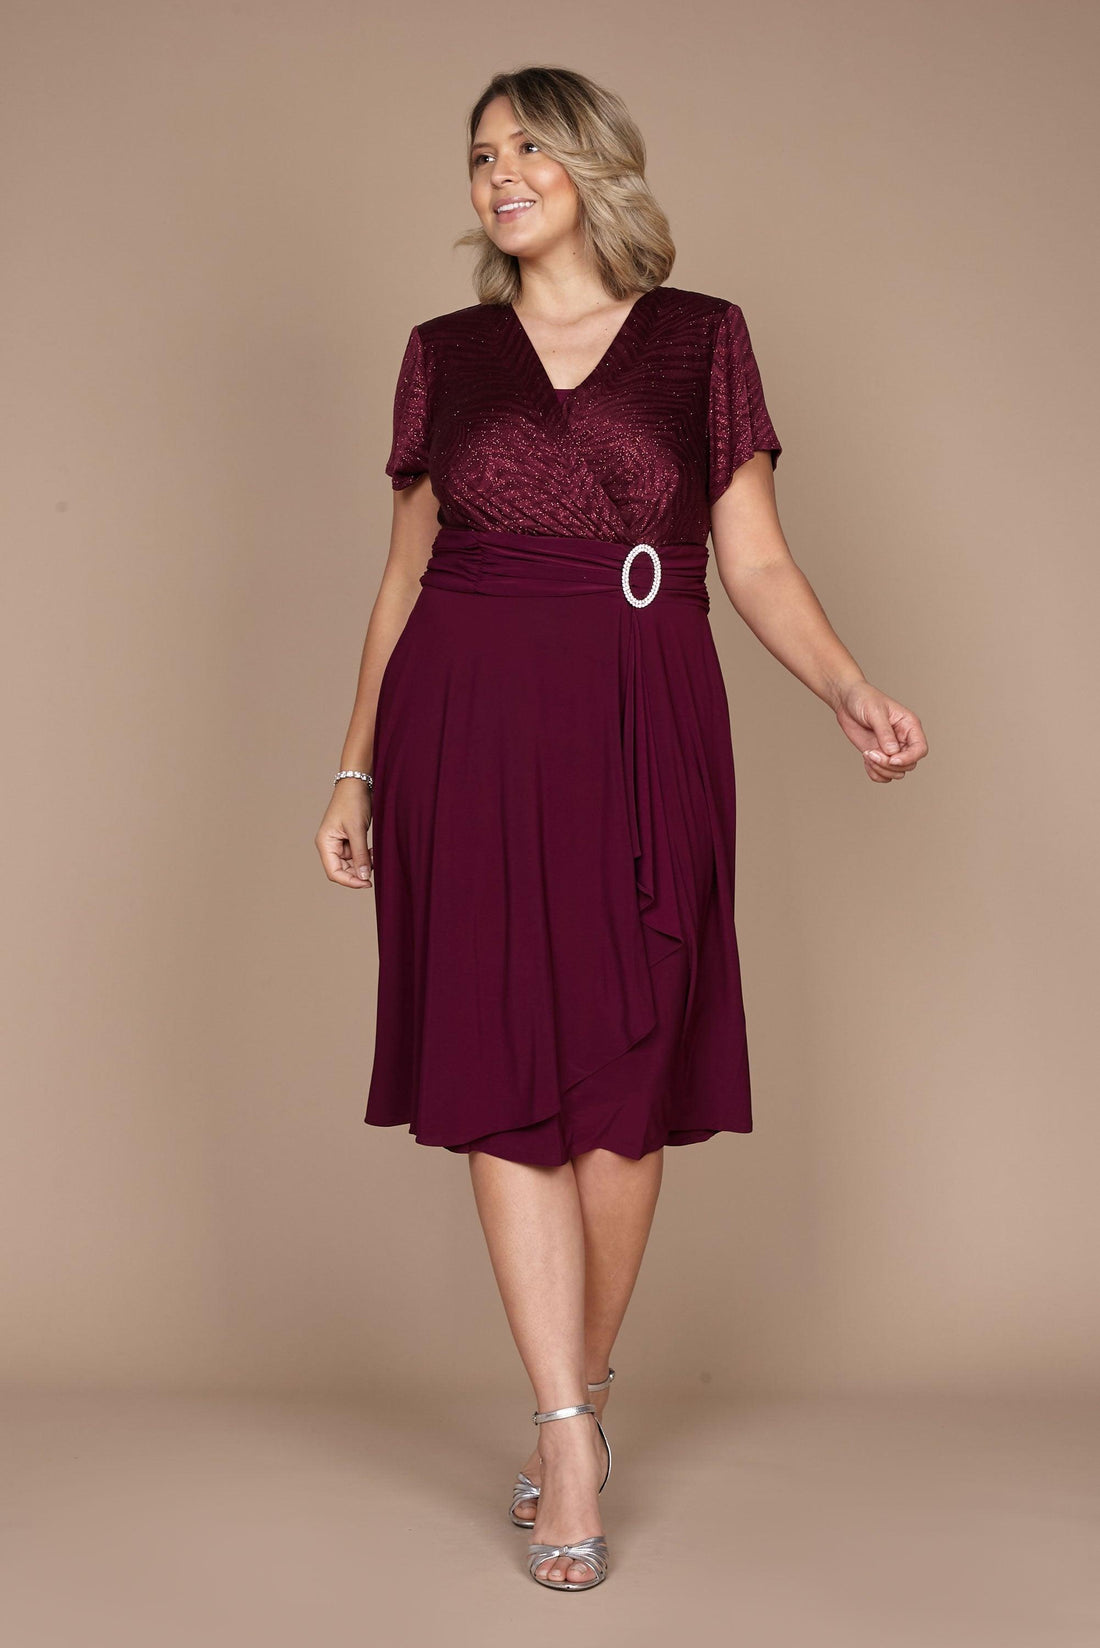 Mother of the Bride Dresses for a Wedding in Autumn - The Dress Outlet